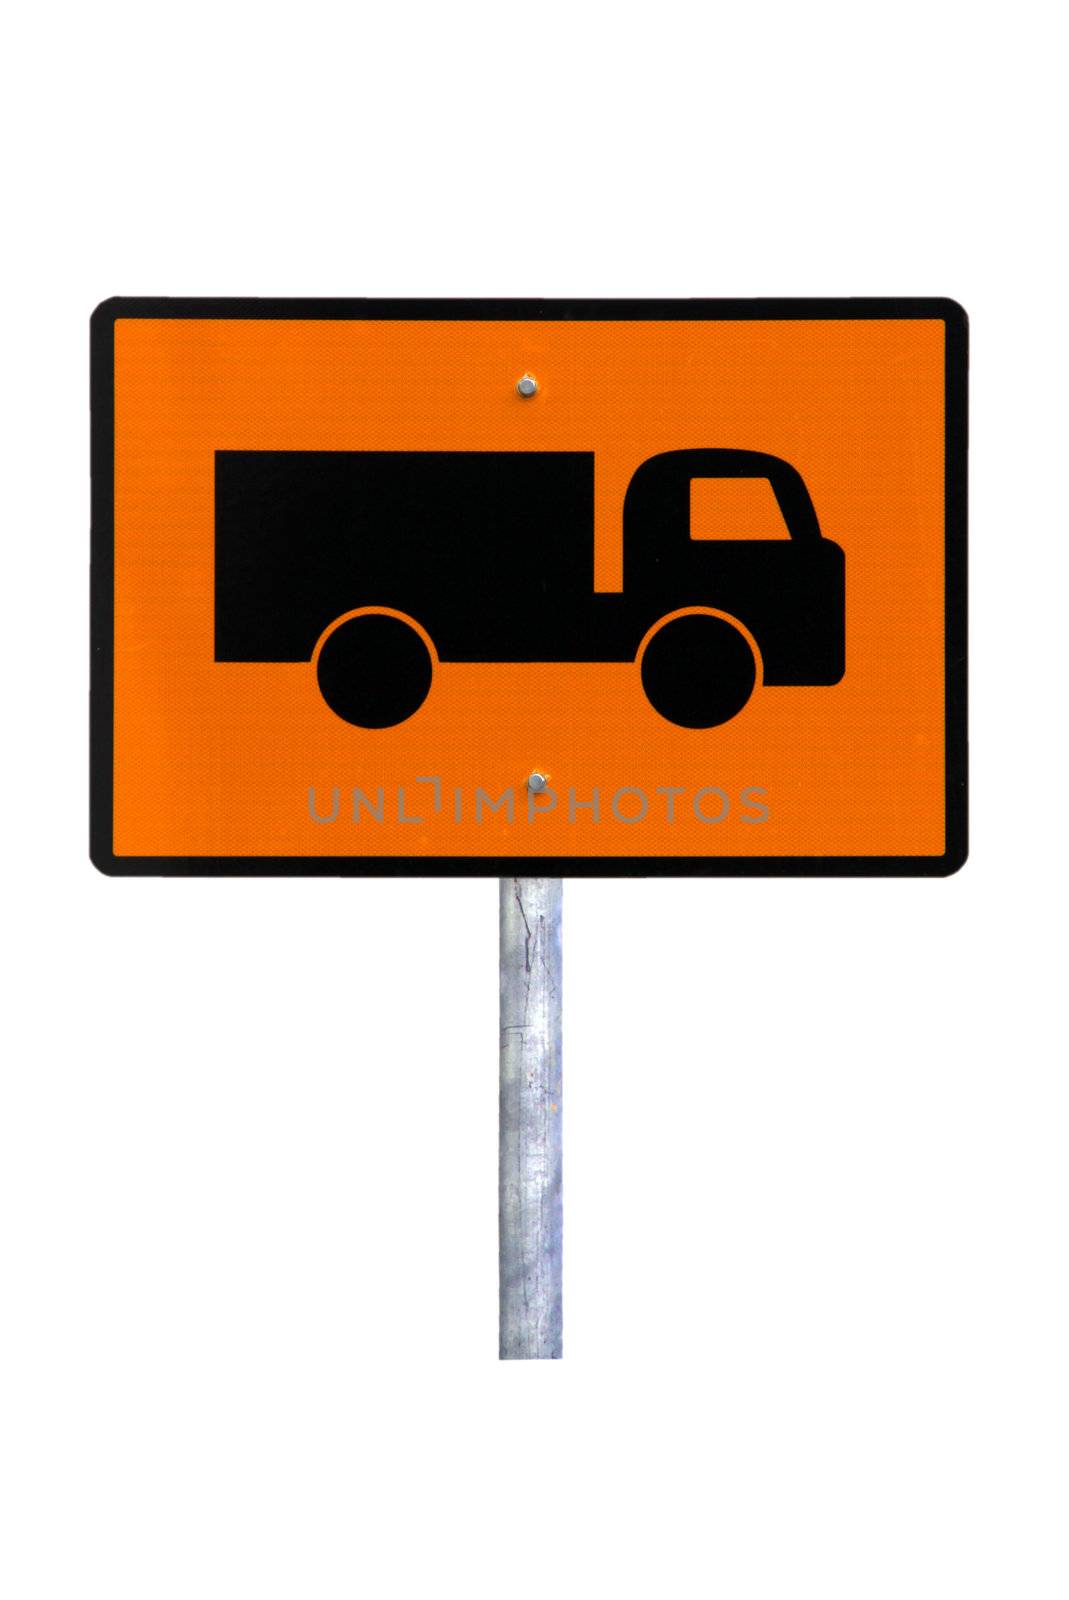 Truck Warning Sign - Current Australian Road Sign (reflective) - by Cloudia